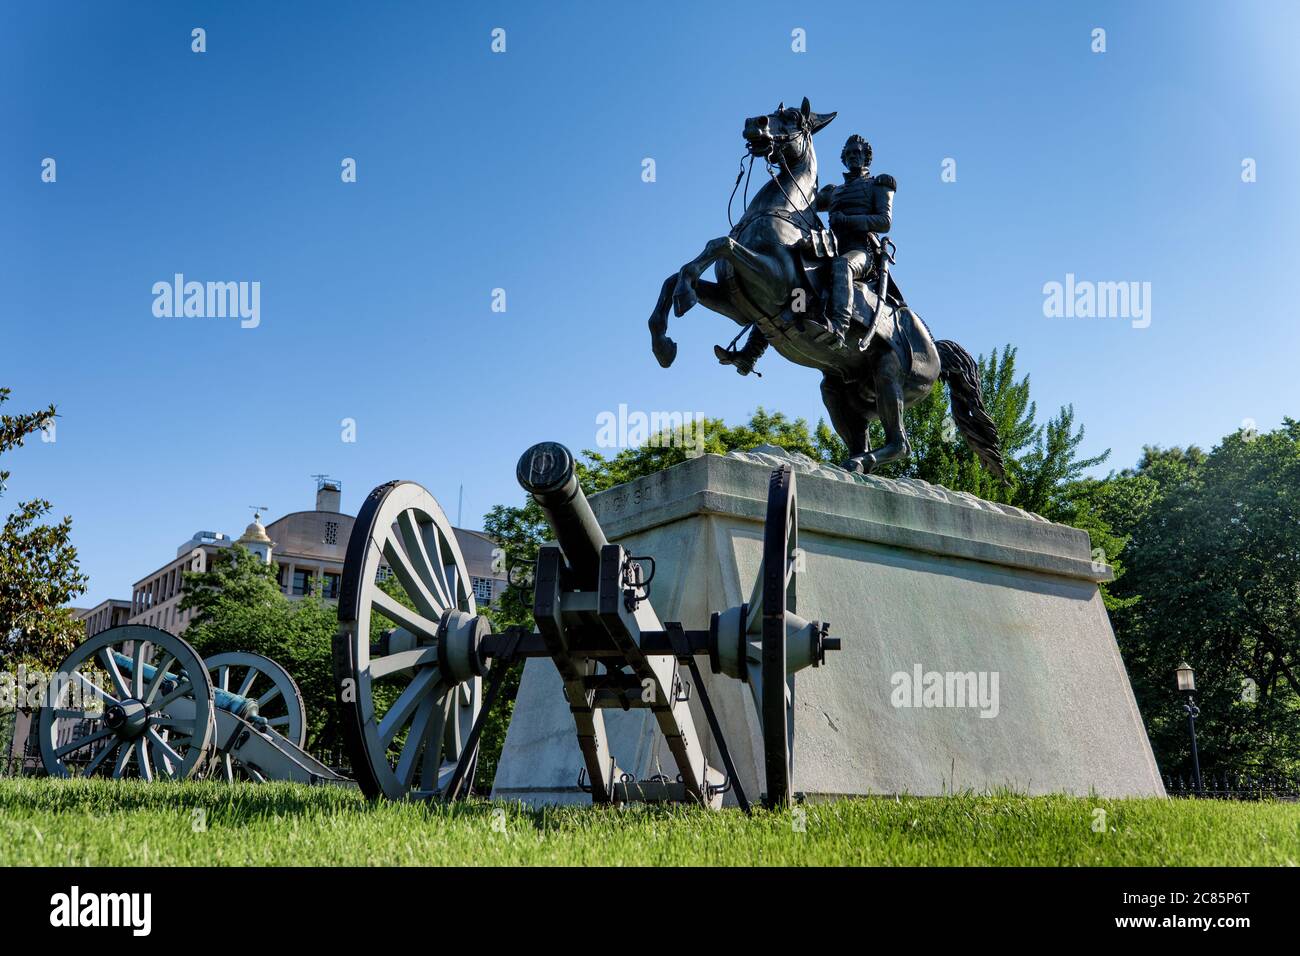 WASHINGTON, DC - A statue of President Andrew Jackson, the seventh president of the United States (1829-1837), in Lafayette Park in downtown Washingto Stock Photo